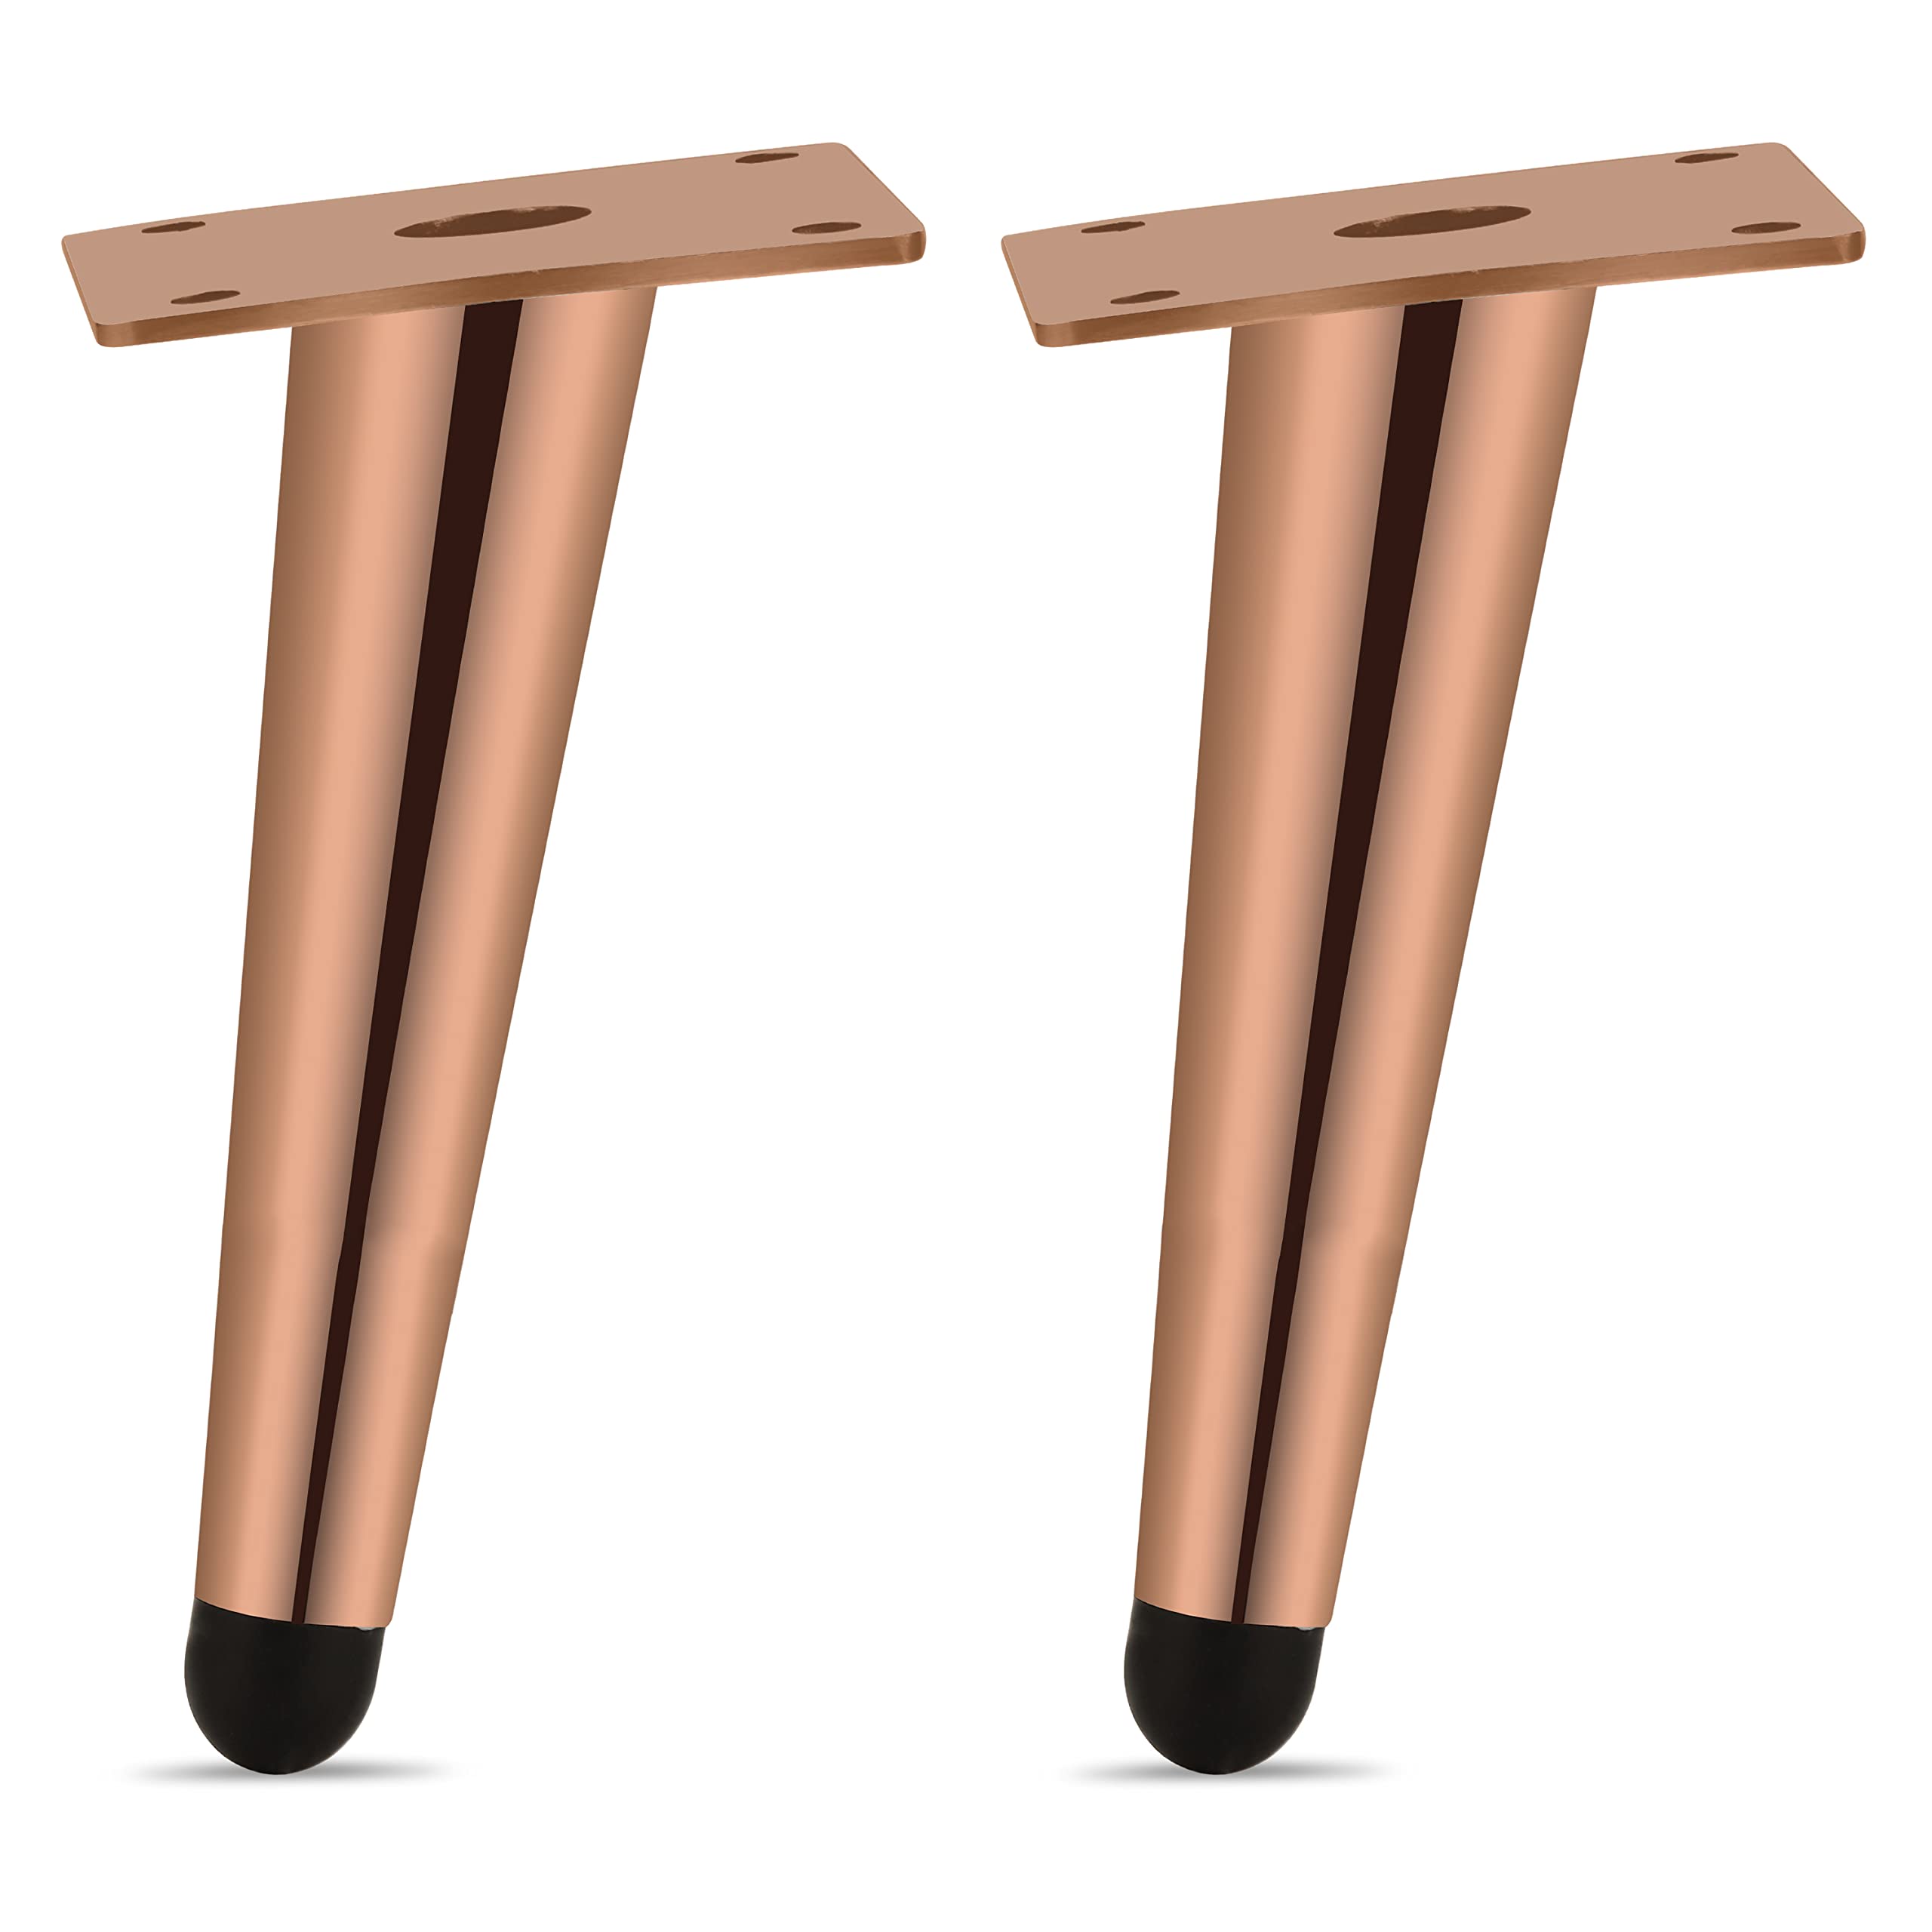 Plantex 304 Grade Stainless Steel 6 inch Sofa Leg/Bed Furniture Leg Pair for Home Furnitures (DTS-54-Rose Gold) – 4 Pcs